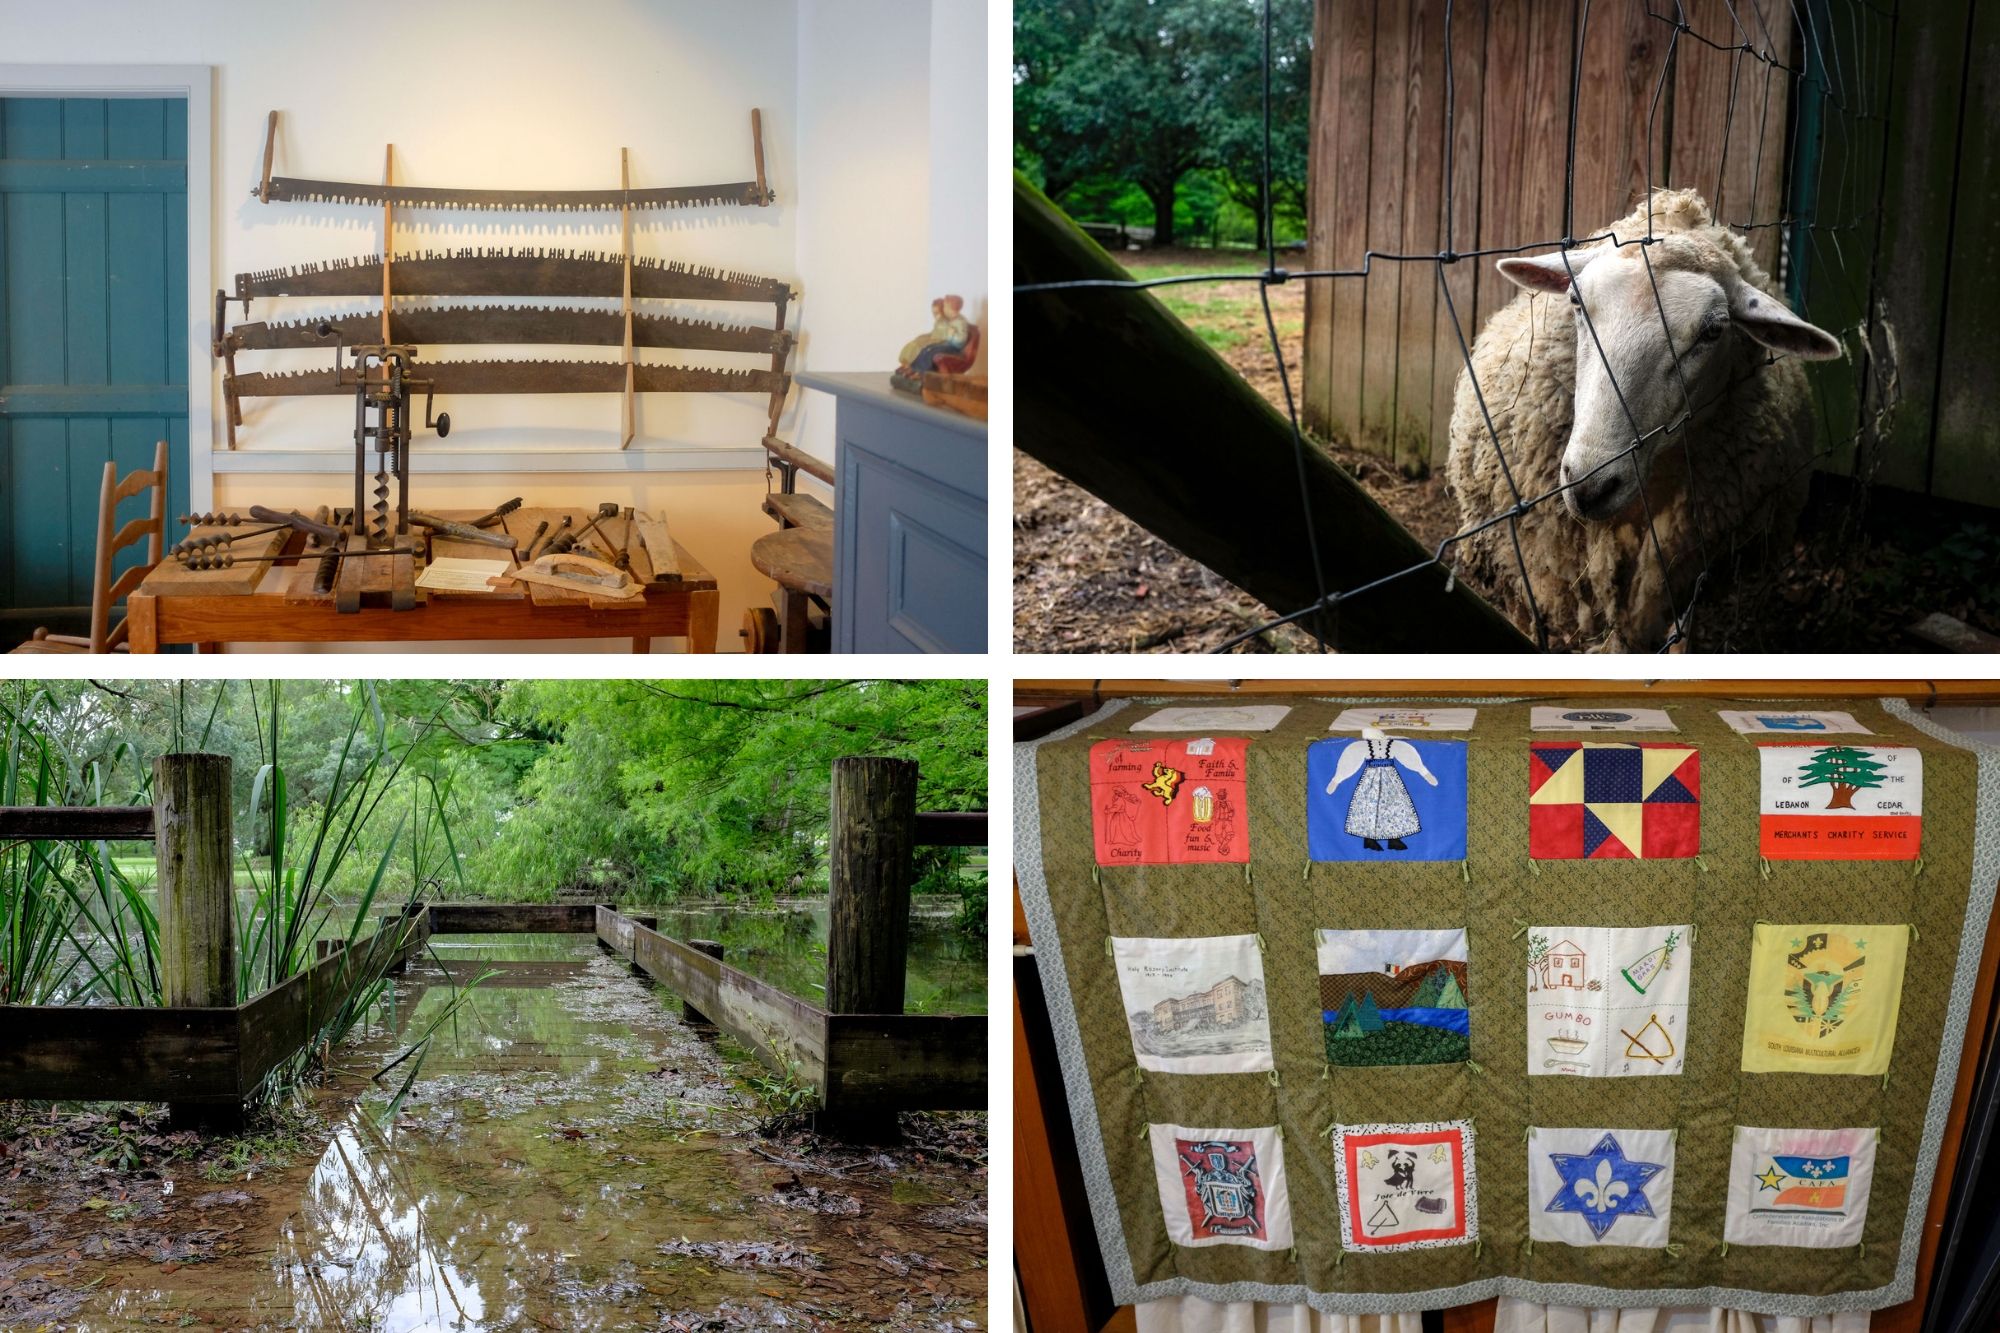 Collage: interior of woodworking studio, a sheep, a dock that is flooded, and a quilt